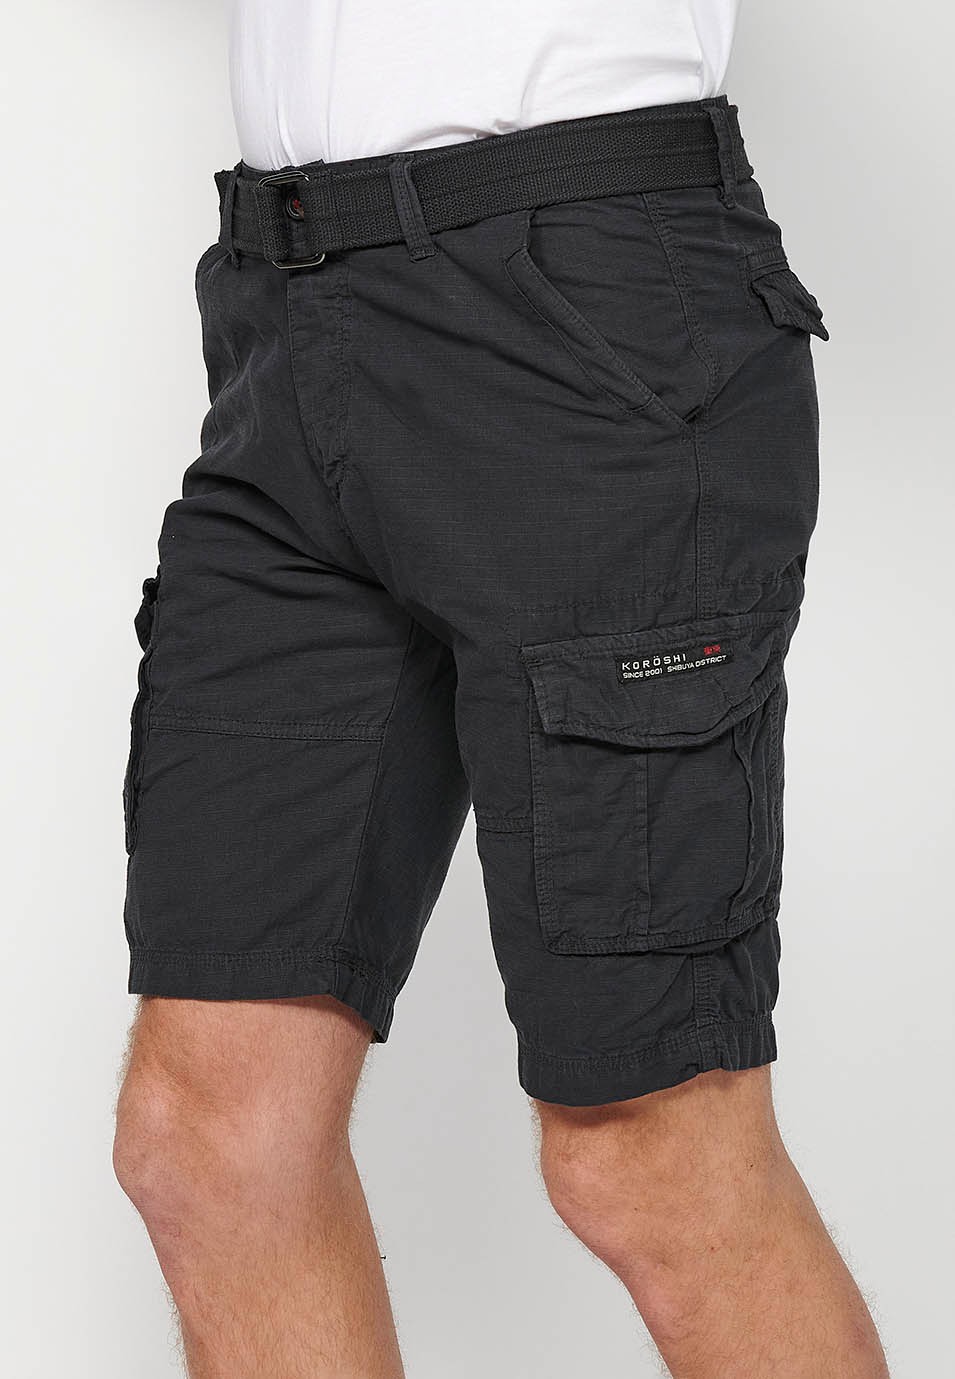 Cotton Cargo Shorts with Belt and Front Closure with Zipper and Button with Pockets, Two Back Pockets with Flap and Two Black Cargo Pants for Men 3